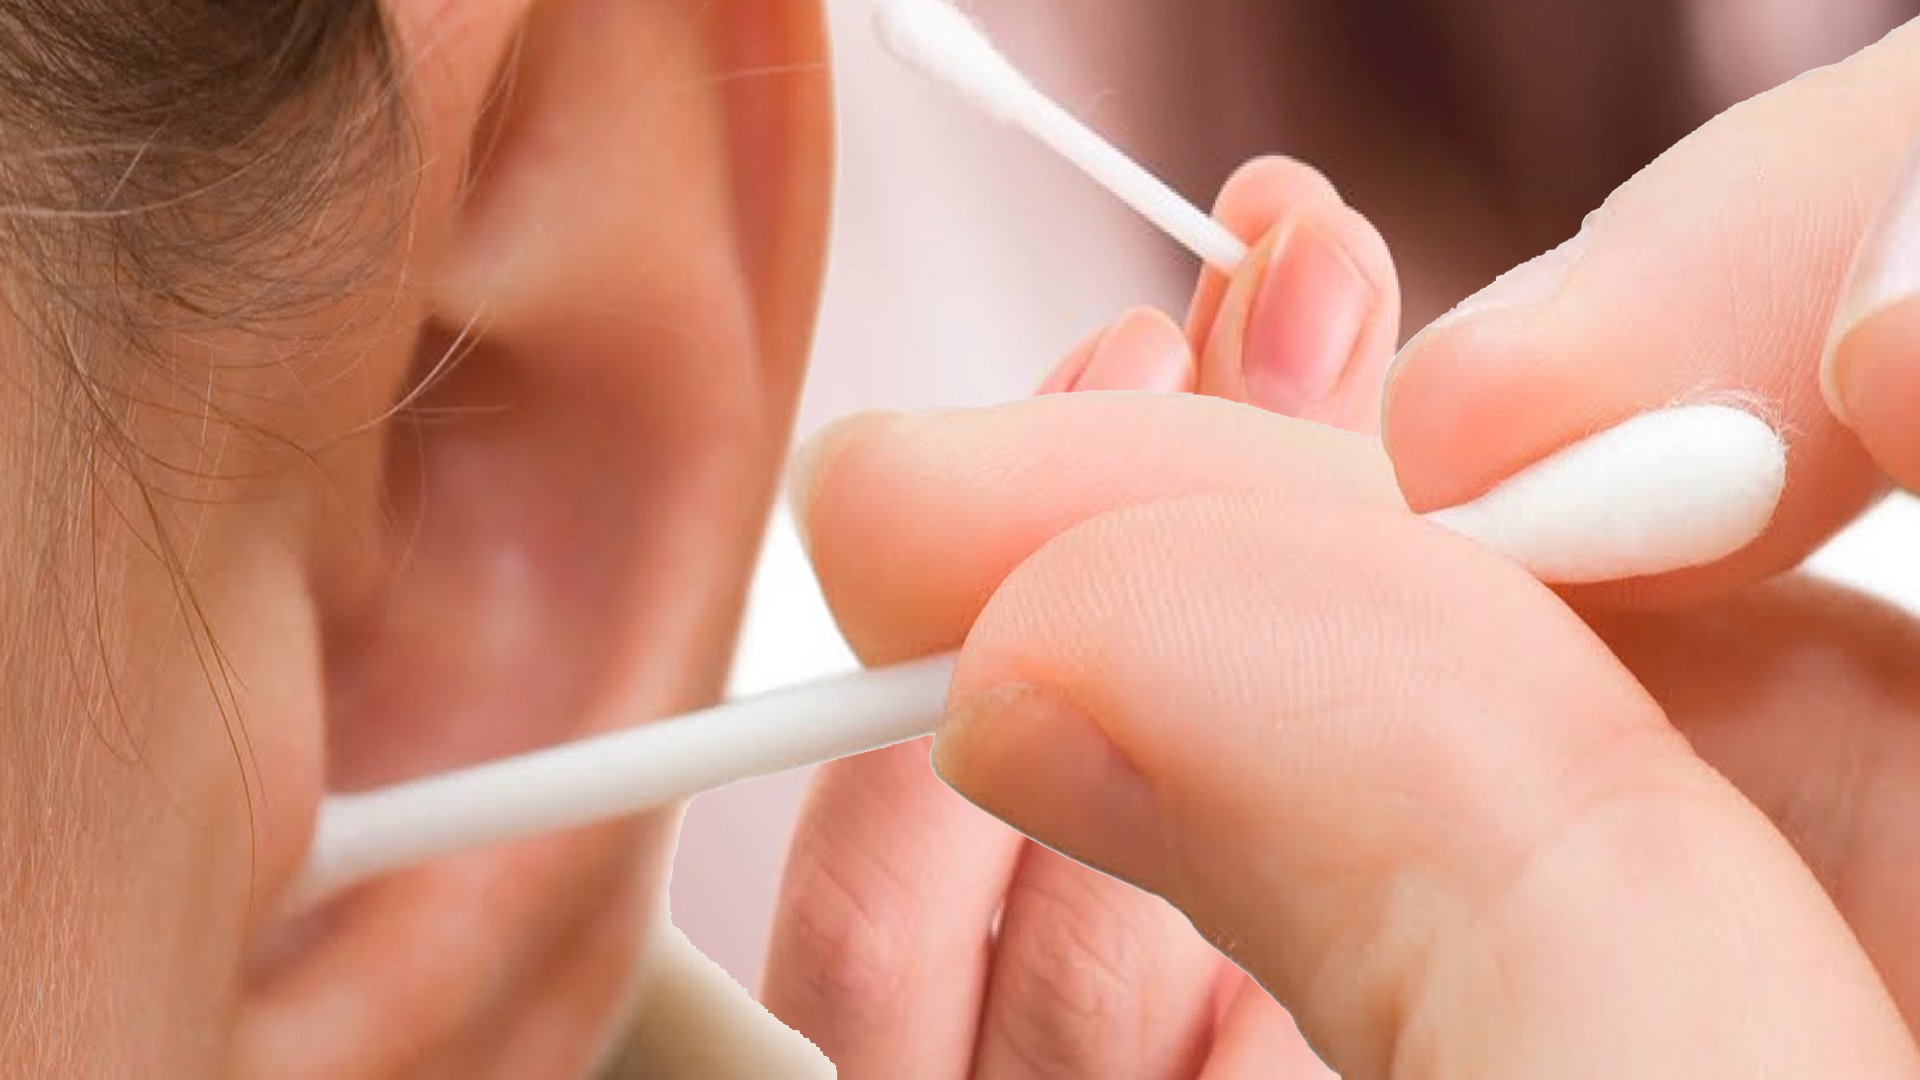 How To Clean Your Ears Safely At Home